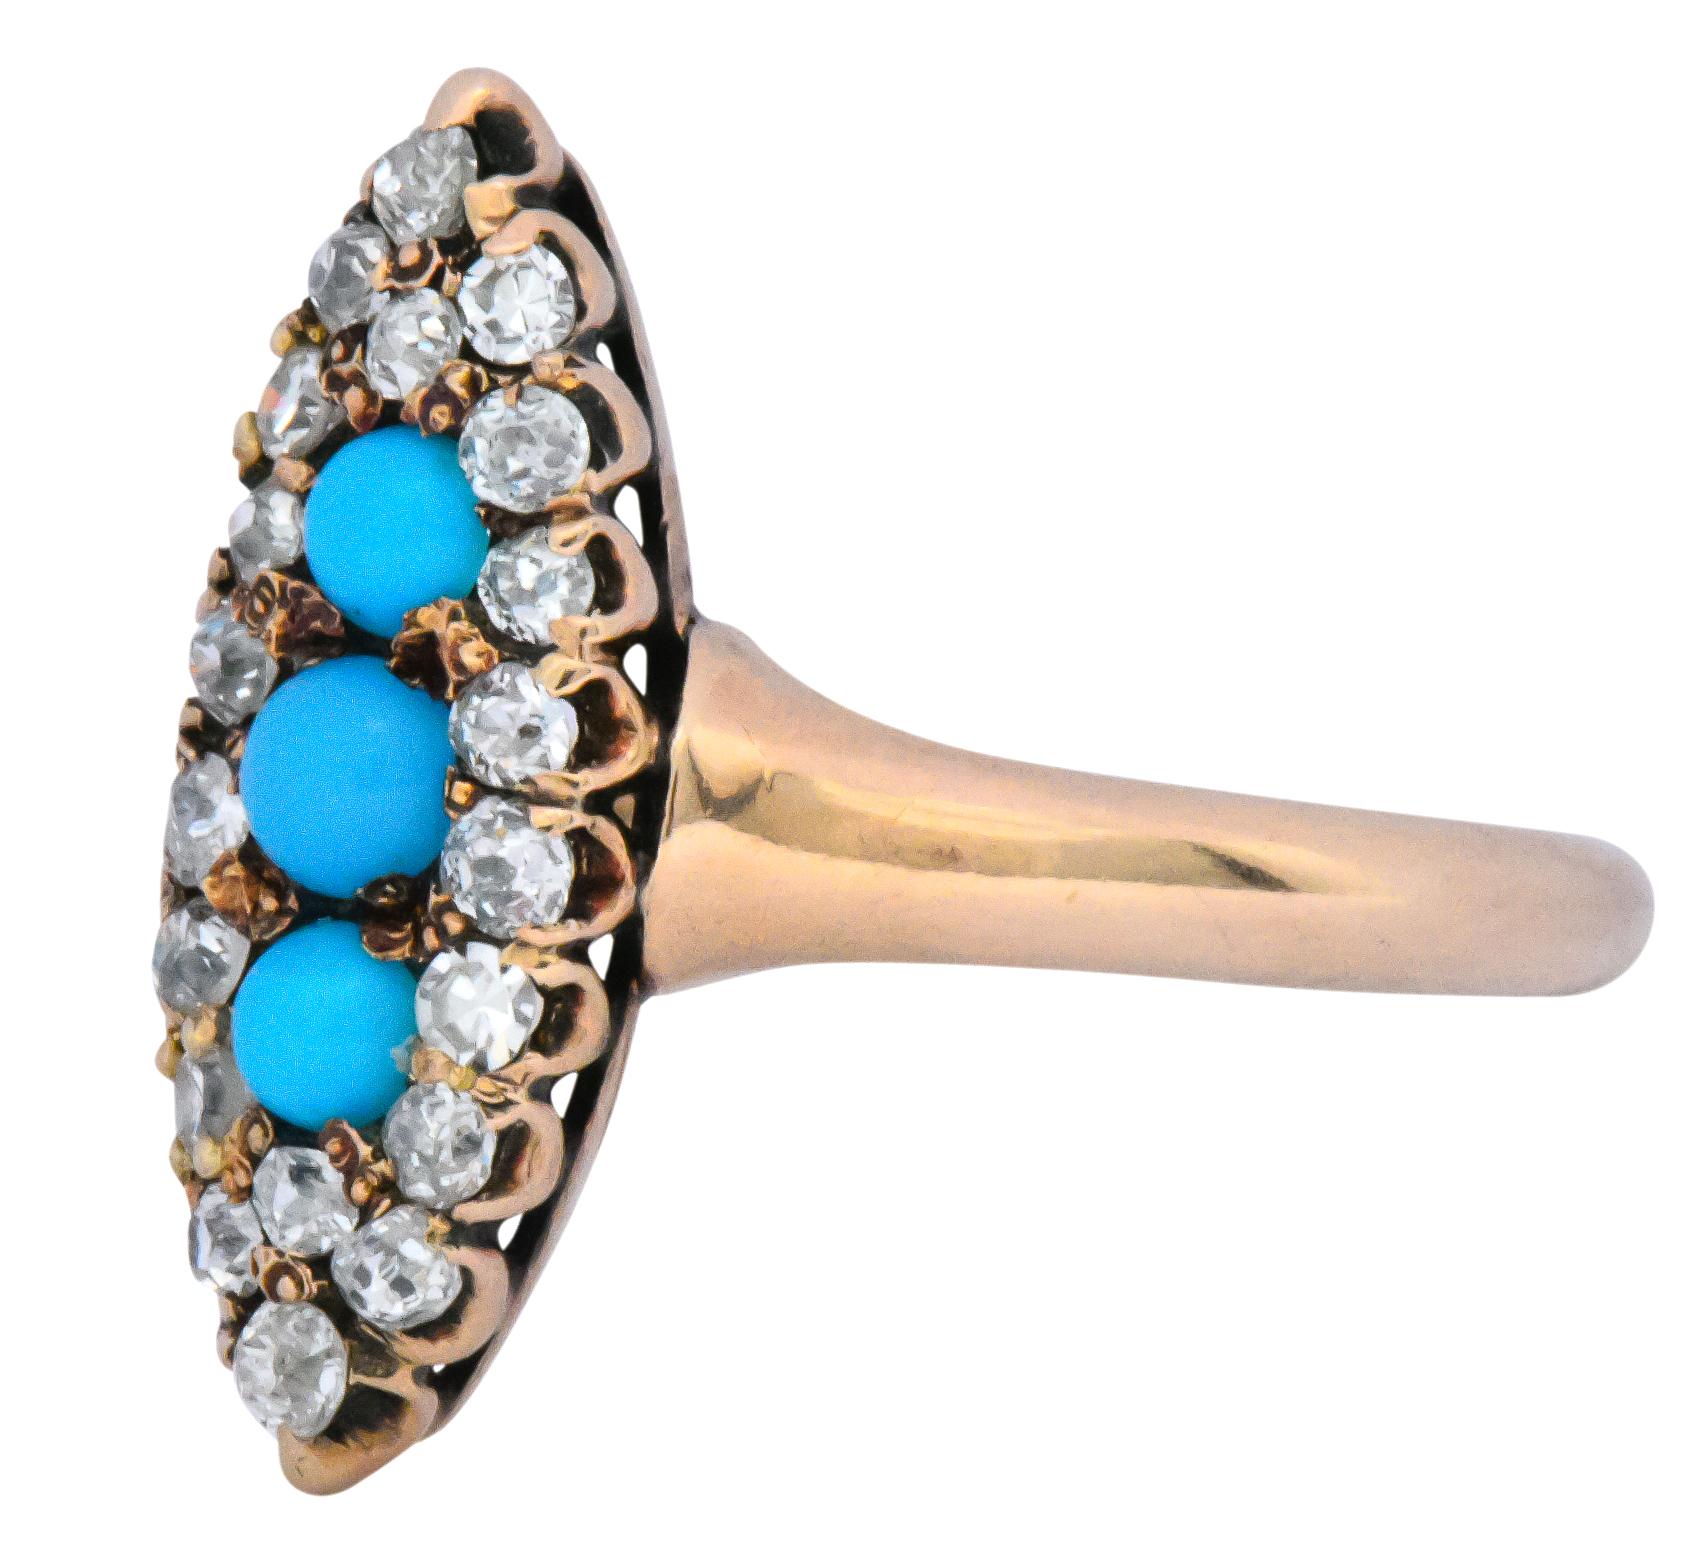 Centering three bright blue turquoise cabochons set north to south

Surrounded by rose cut and single cut diamonds weighing approximately 0.30 carat total

Stamped 14 with dated inscription on shank

Ring Size: 6 1/4

Top Measures: 17.4 x 7.5 mm and